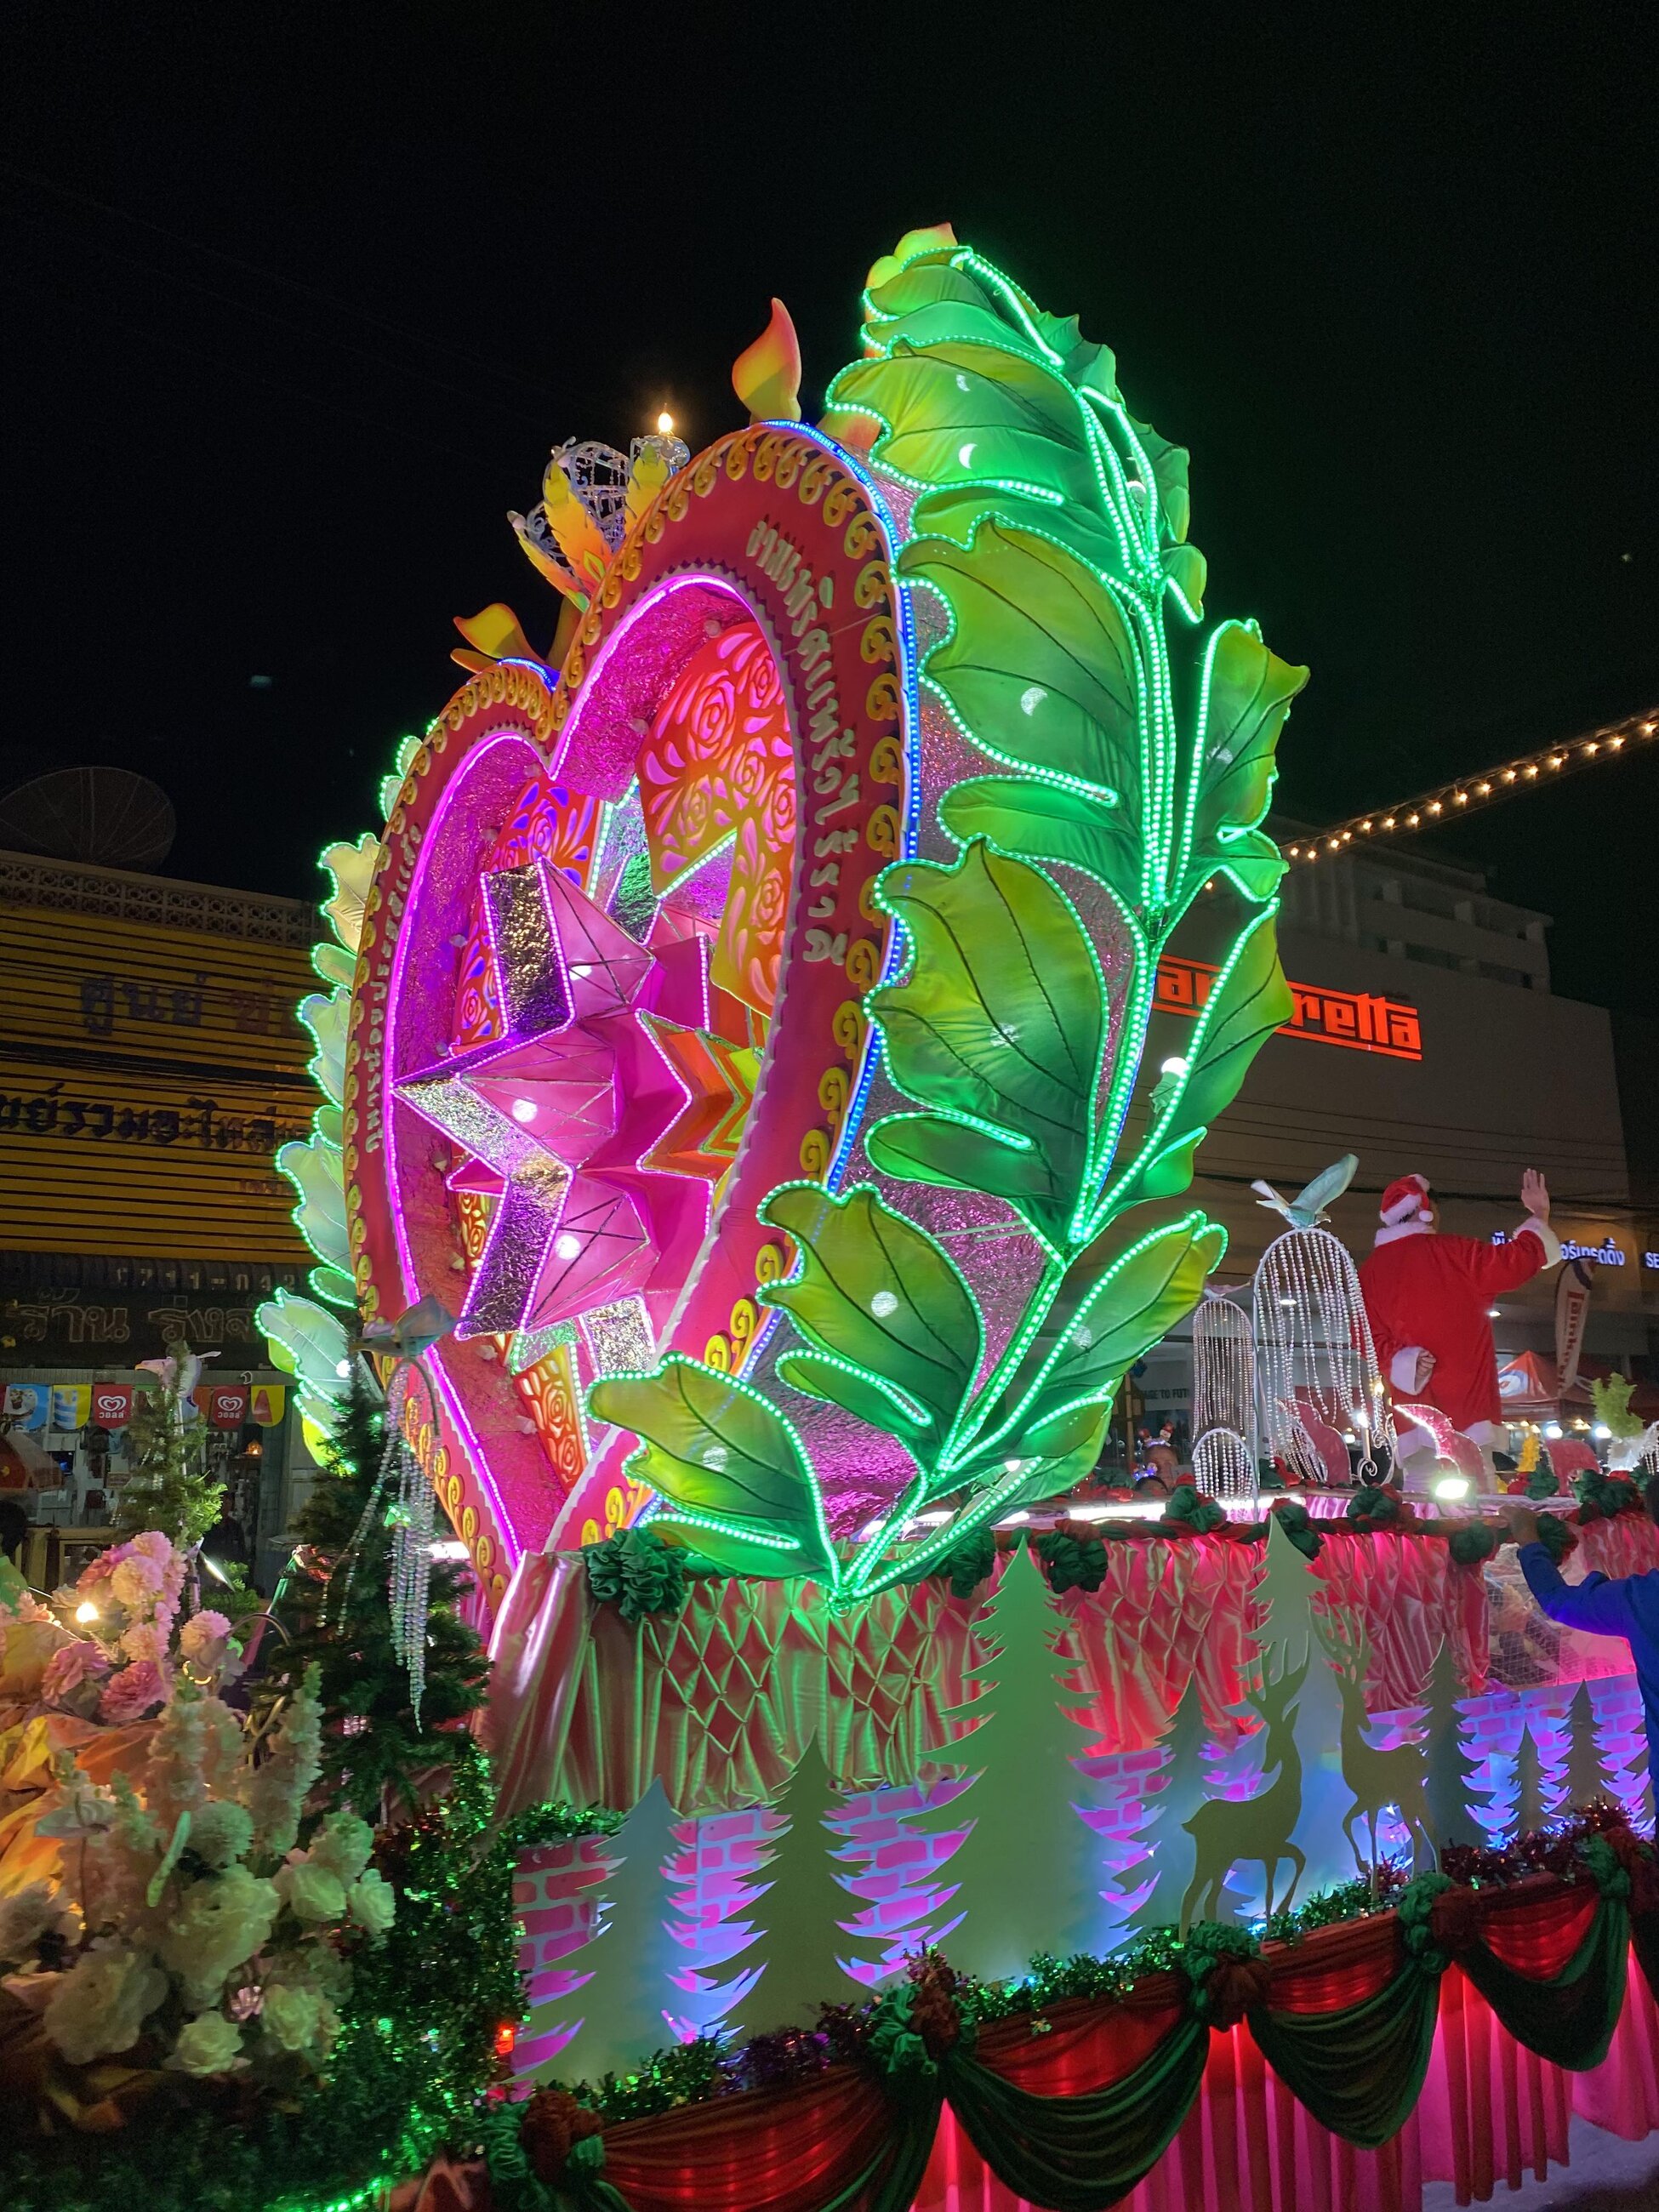 One of the Christmas floats